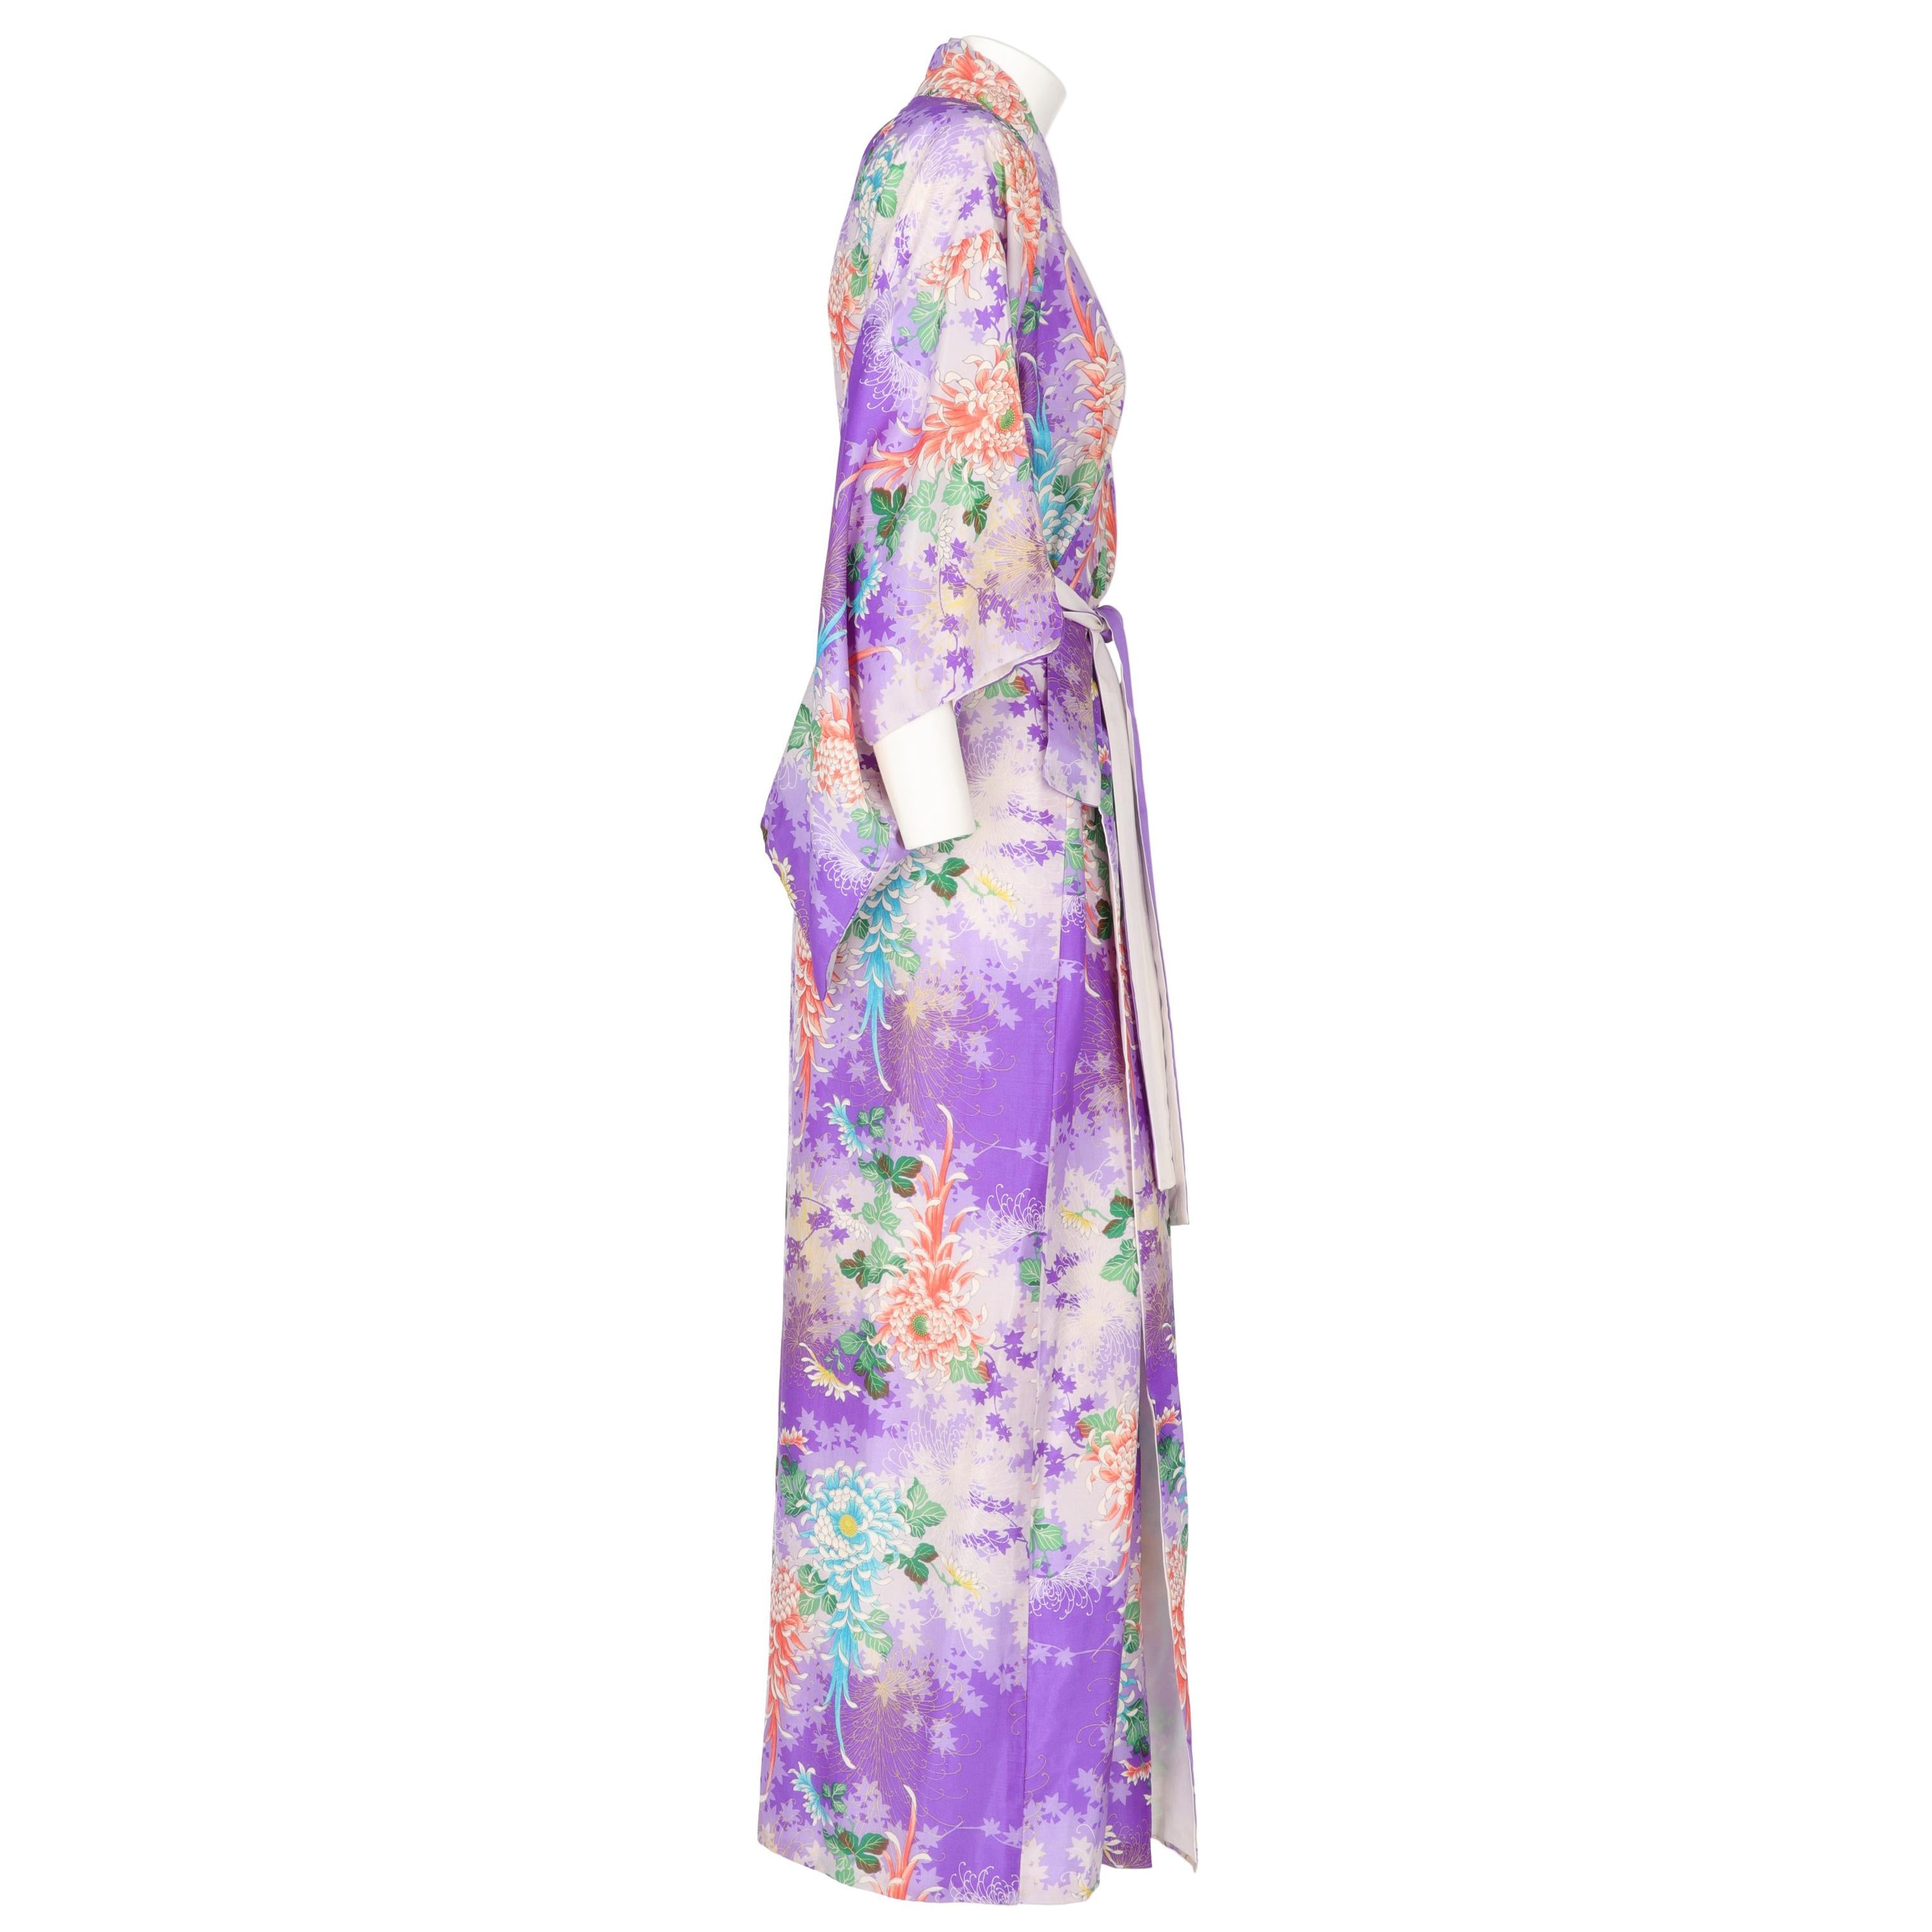 70s silk long kimono from Japan, with lilac purple peach color white and green flower fancy print, with belt and white silk lining.

Years: 1970
Made in Japan

Linear Measures: 
Height: 135 cm
Sleeves: 29 cm
Shoulders: 59 cm